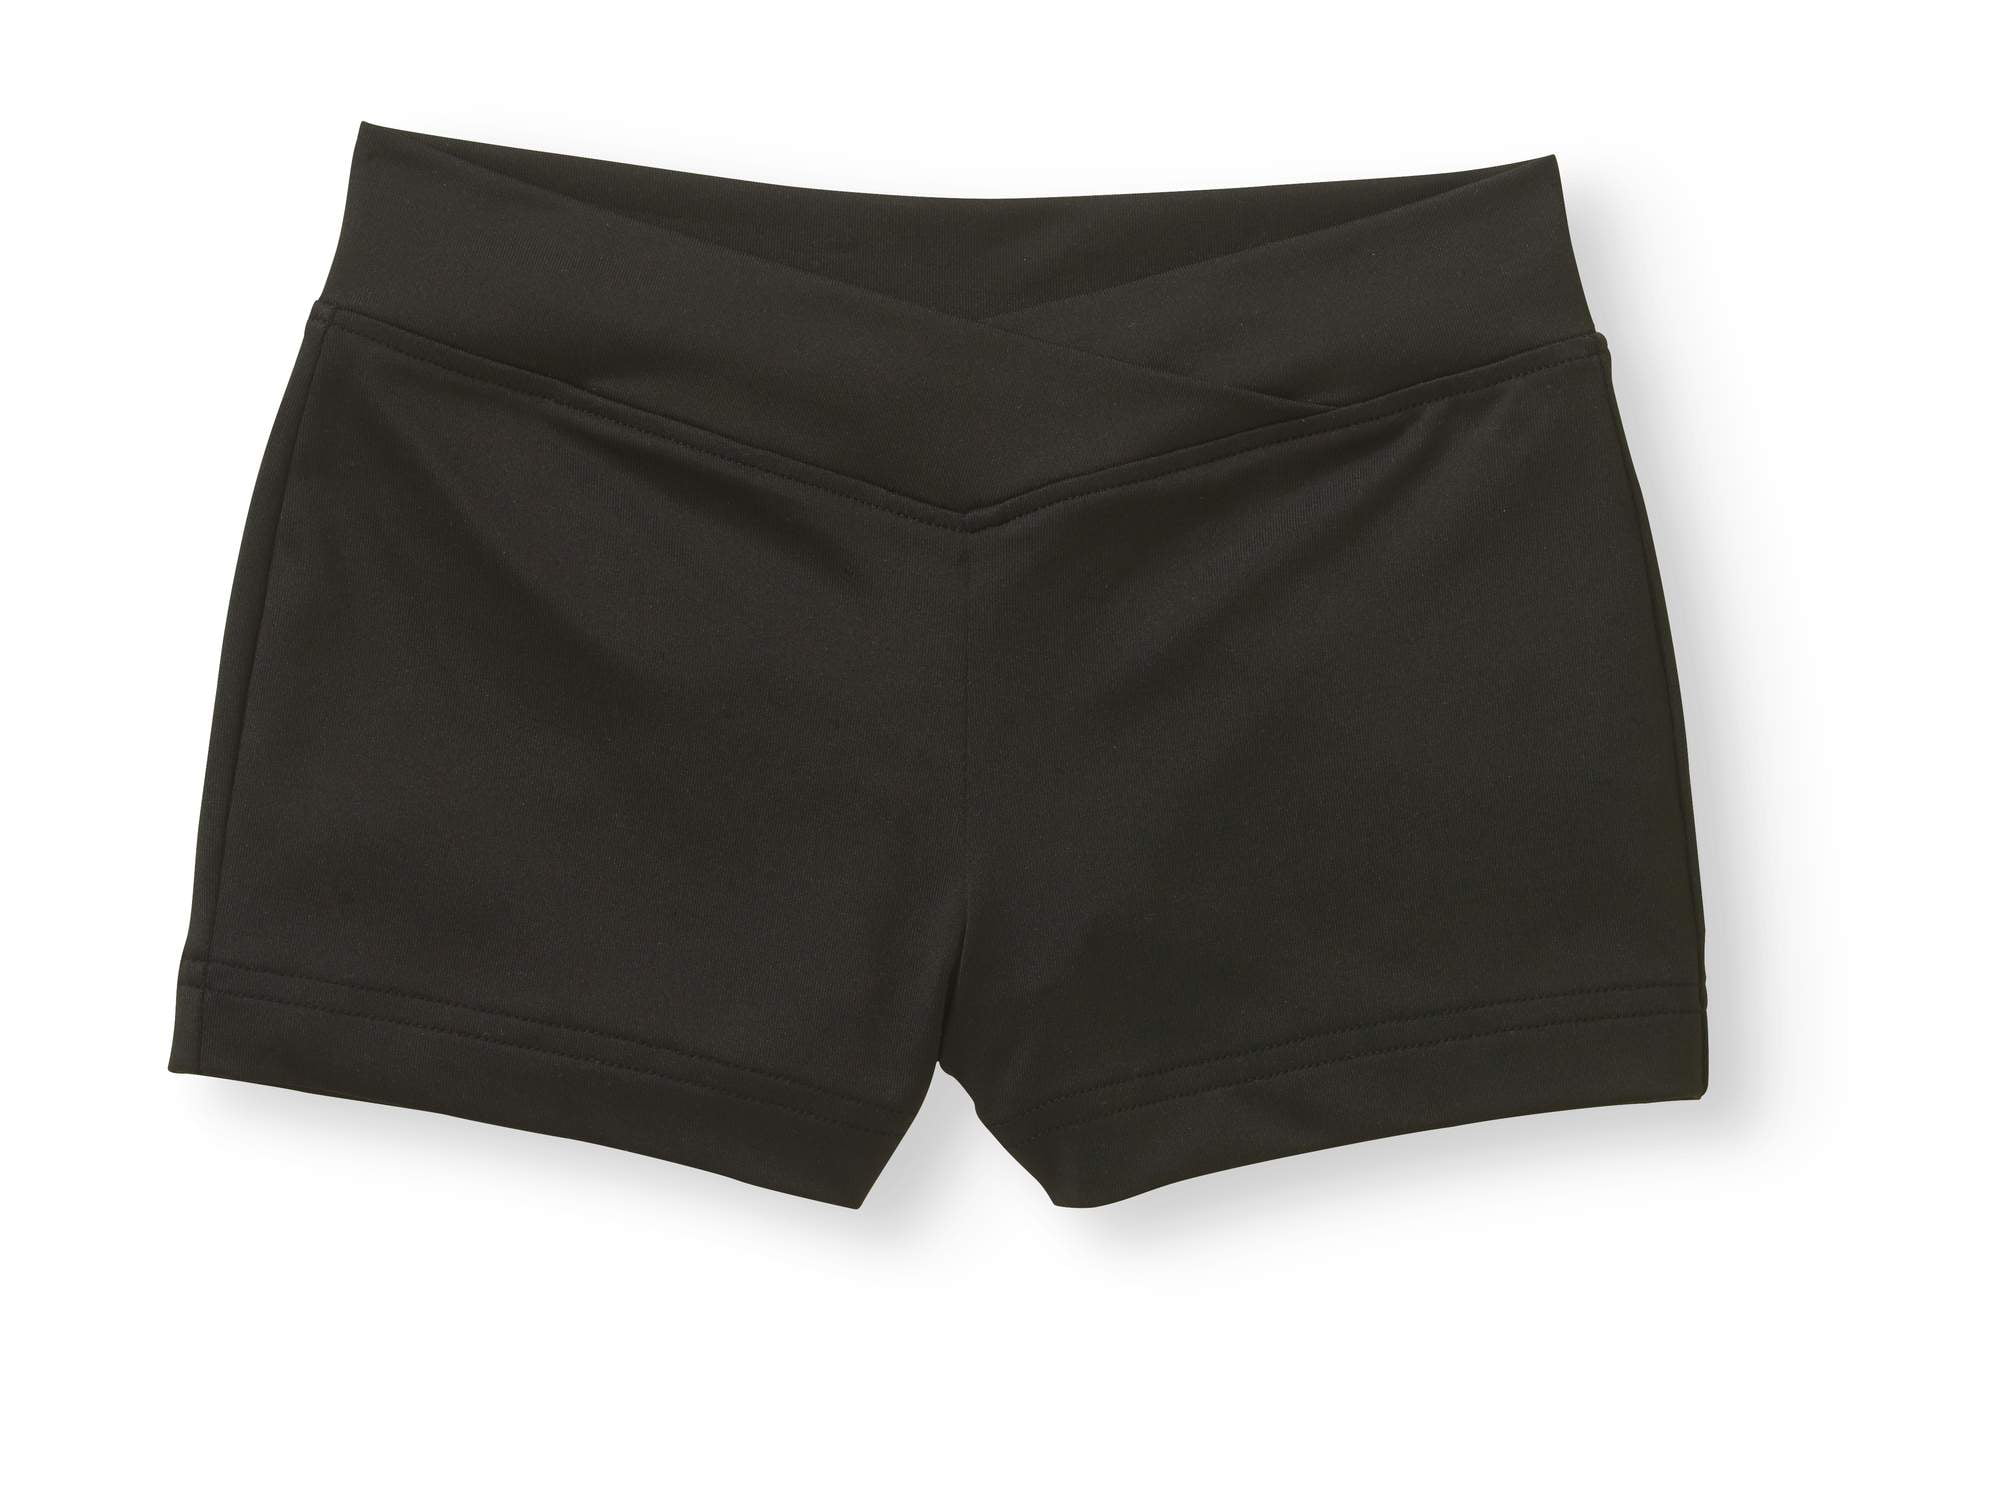 M Shorts for Gymnastics or Dance  Child Size: XS L S XL. 